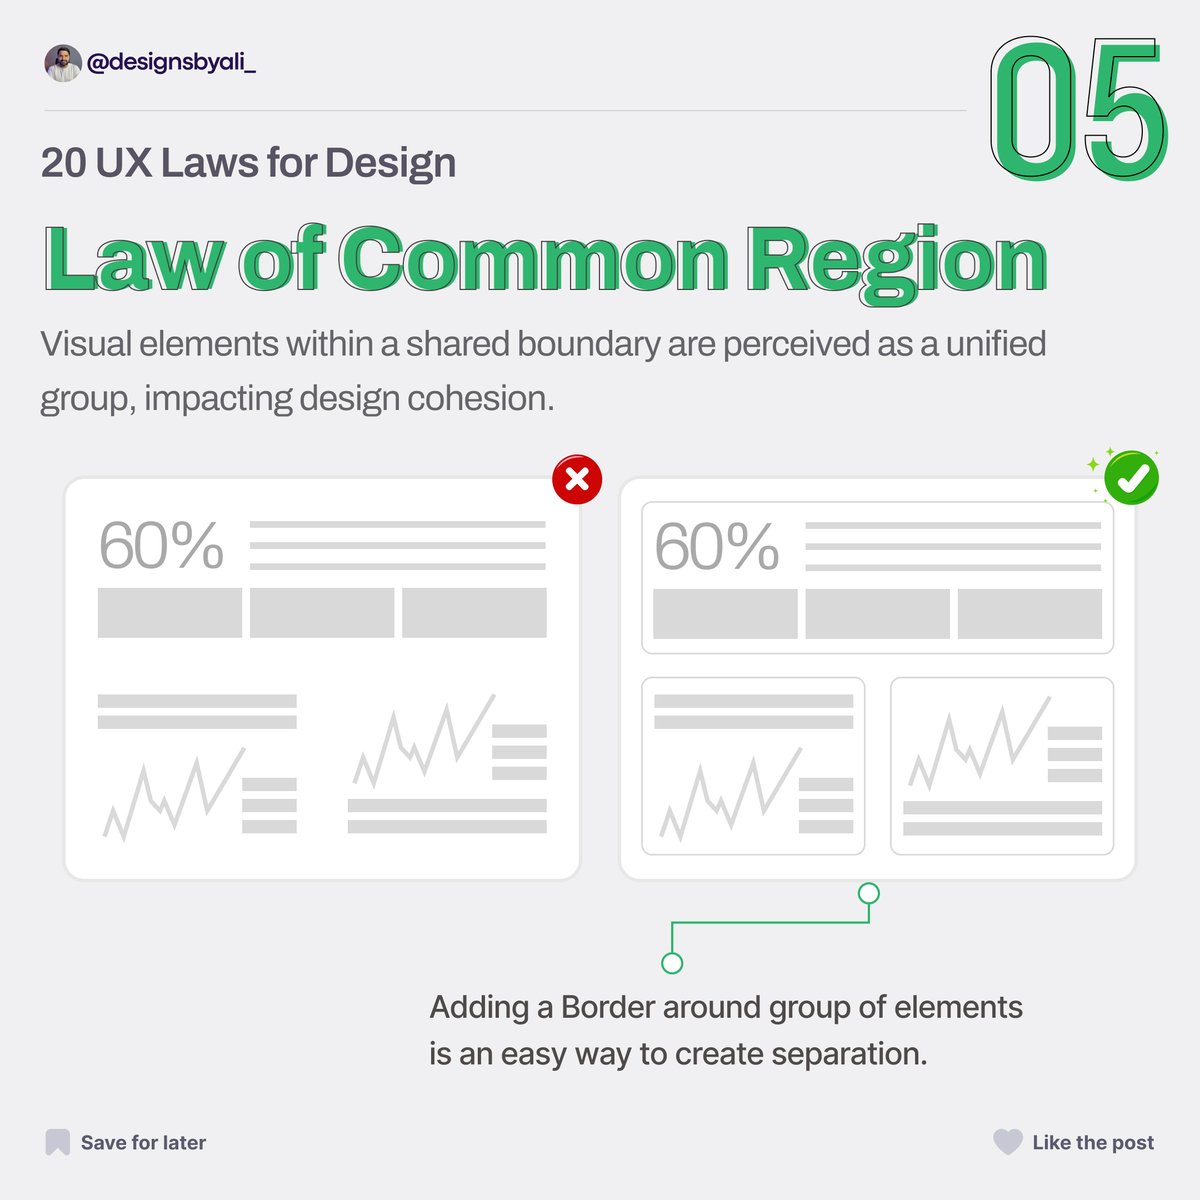 Top UX Laws: Law of Common Region 🌐
Visual elements within a shared boundary are perceived as a unified group, impacting design cohesion. 🖼️

#LawOfCommonRegion #DesignPrinciples #VisualDesign #Cohesion #Grouping #UIUX #designsbyali #uidesigner #uxlaws